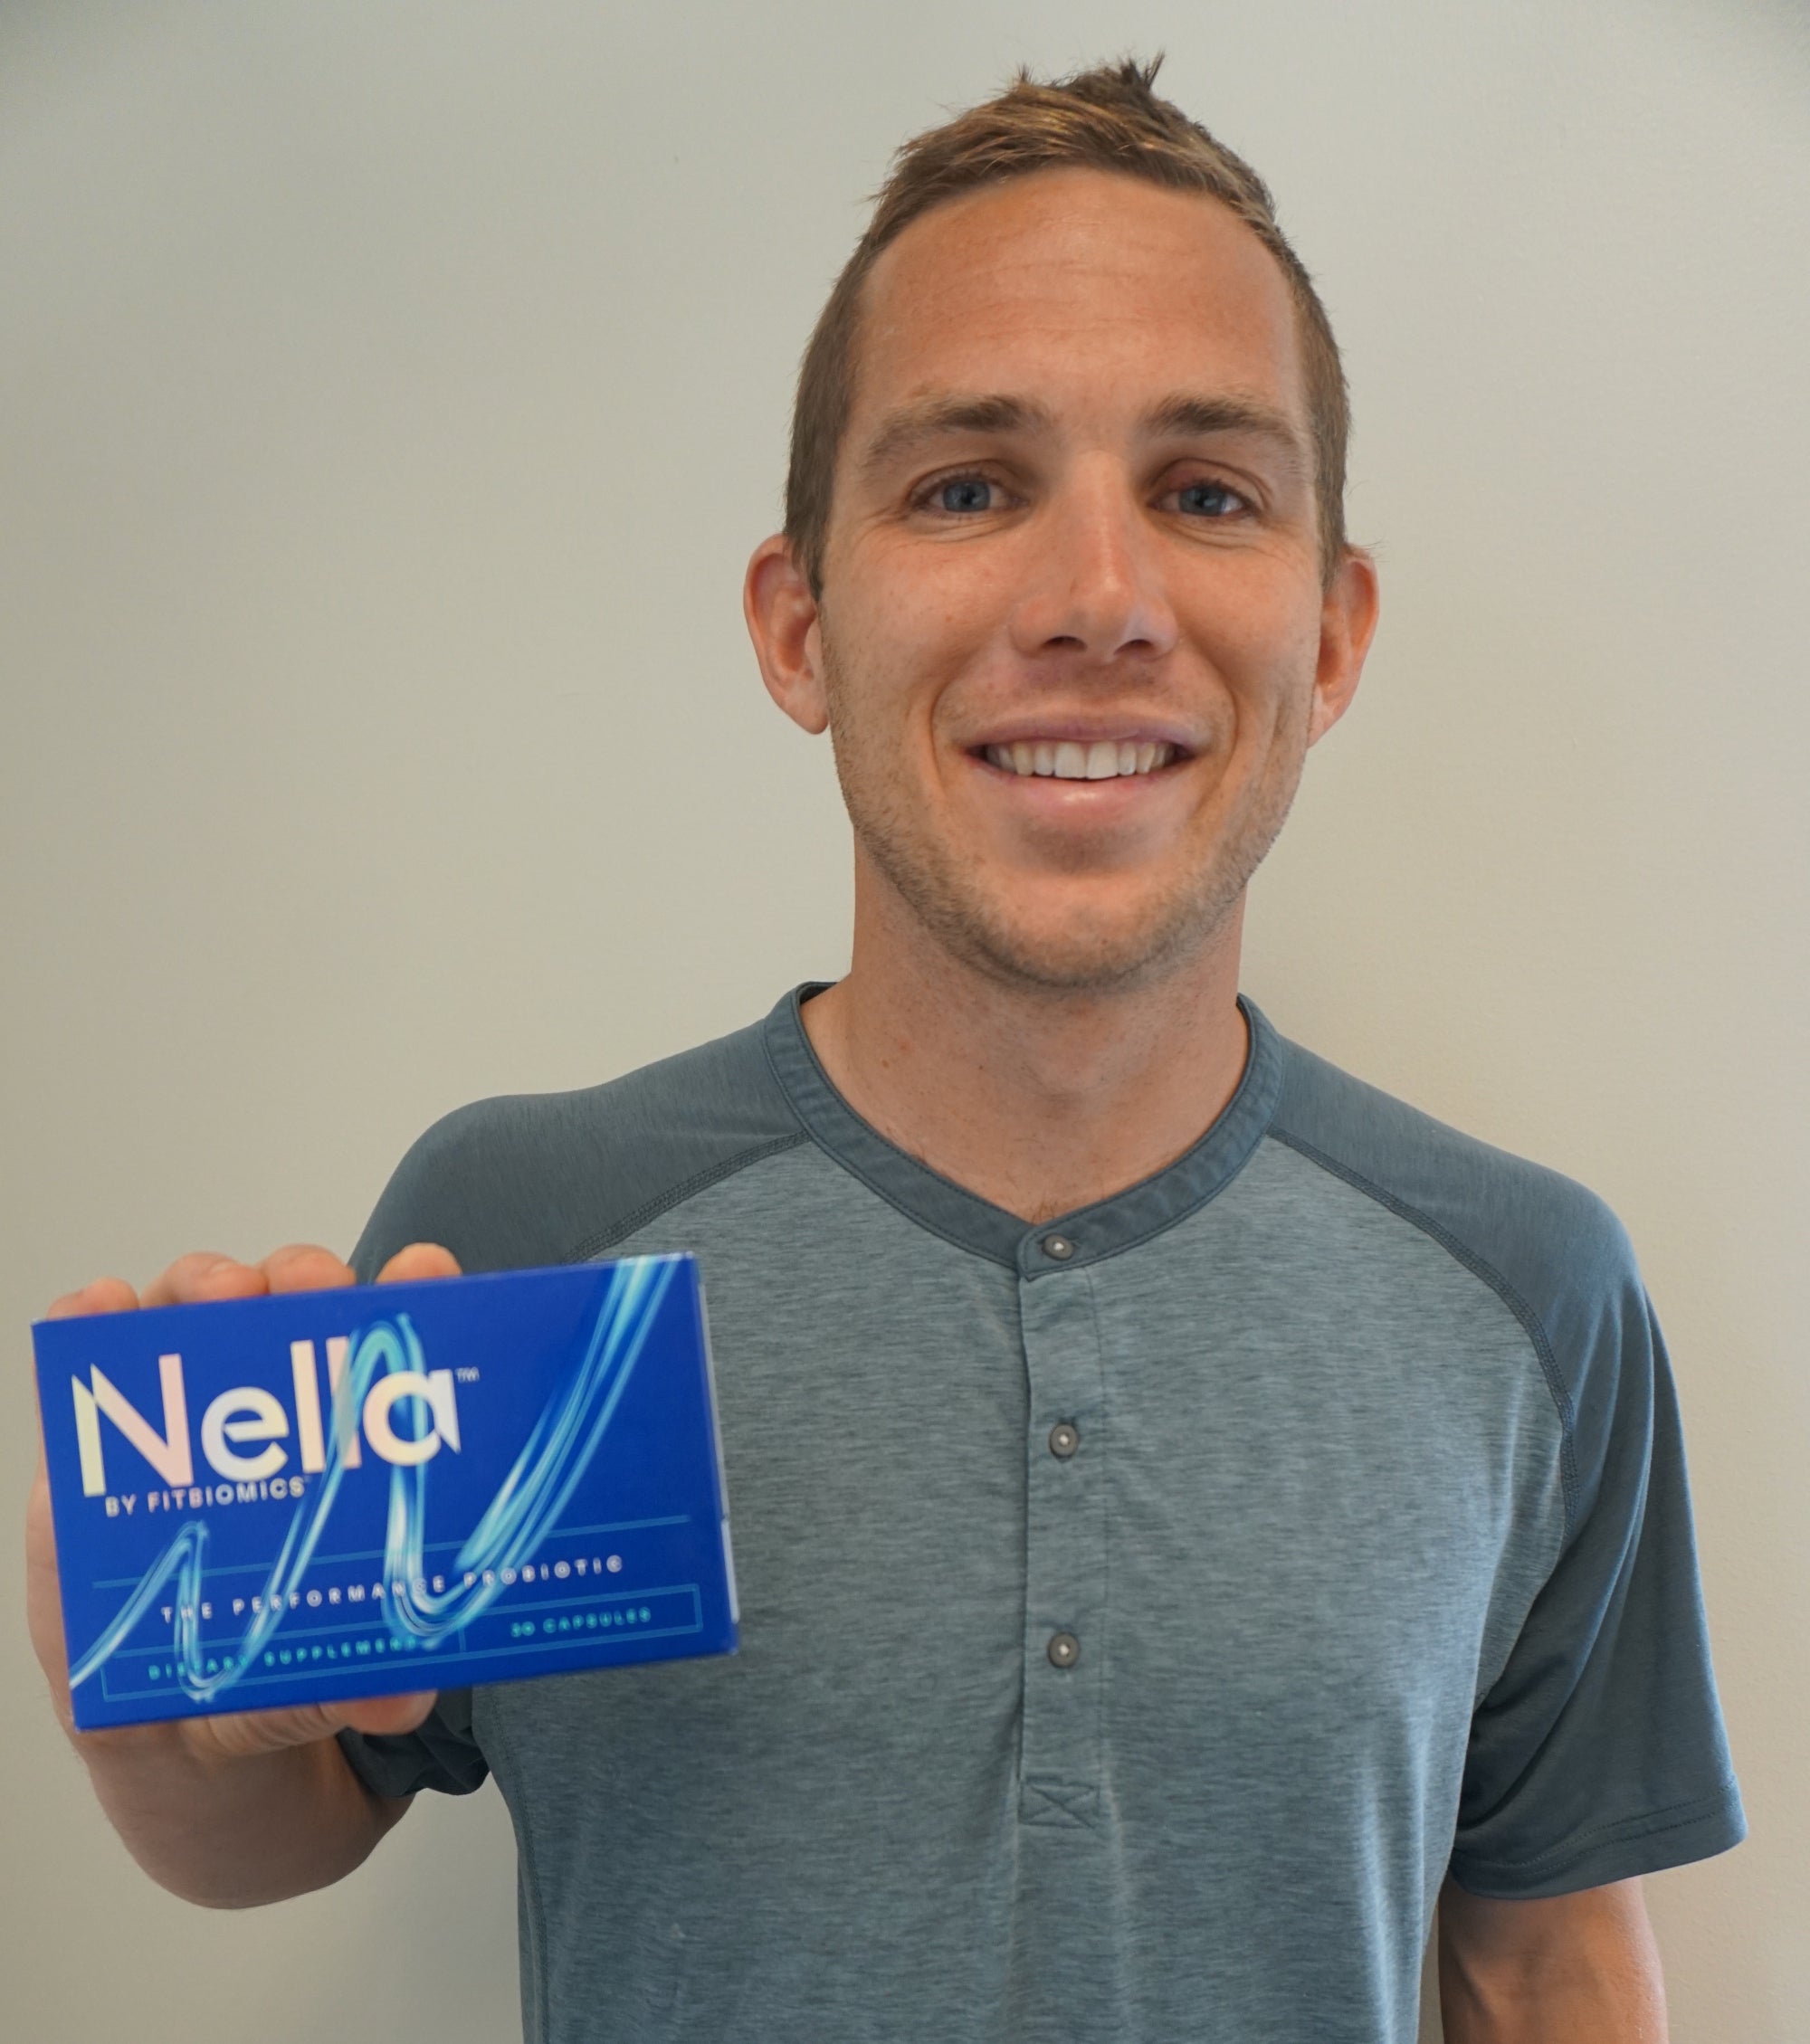 Nella Gut Health Probiotic for Digestion, Sleep, and Energy